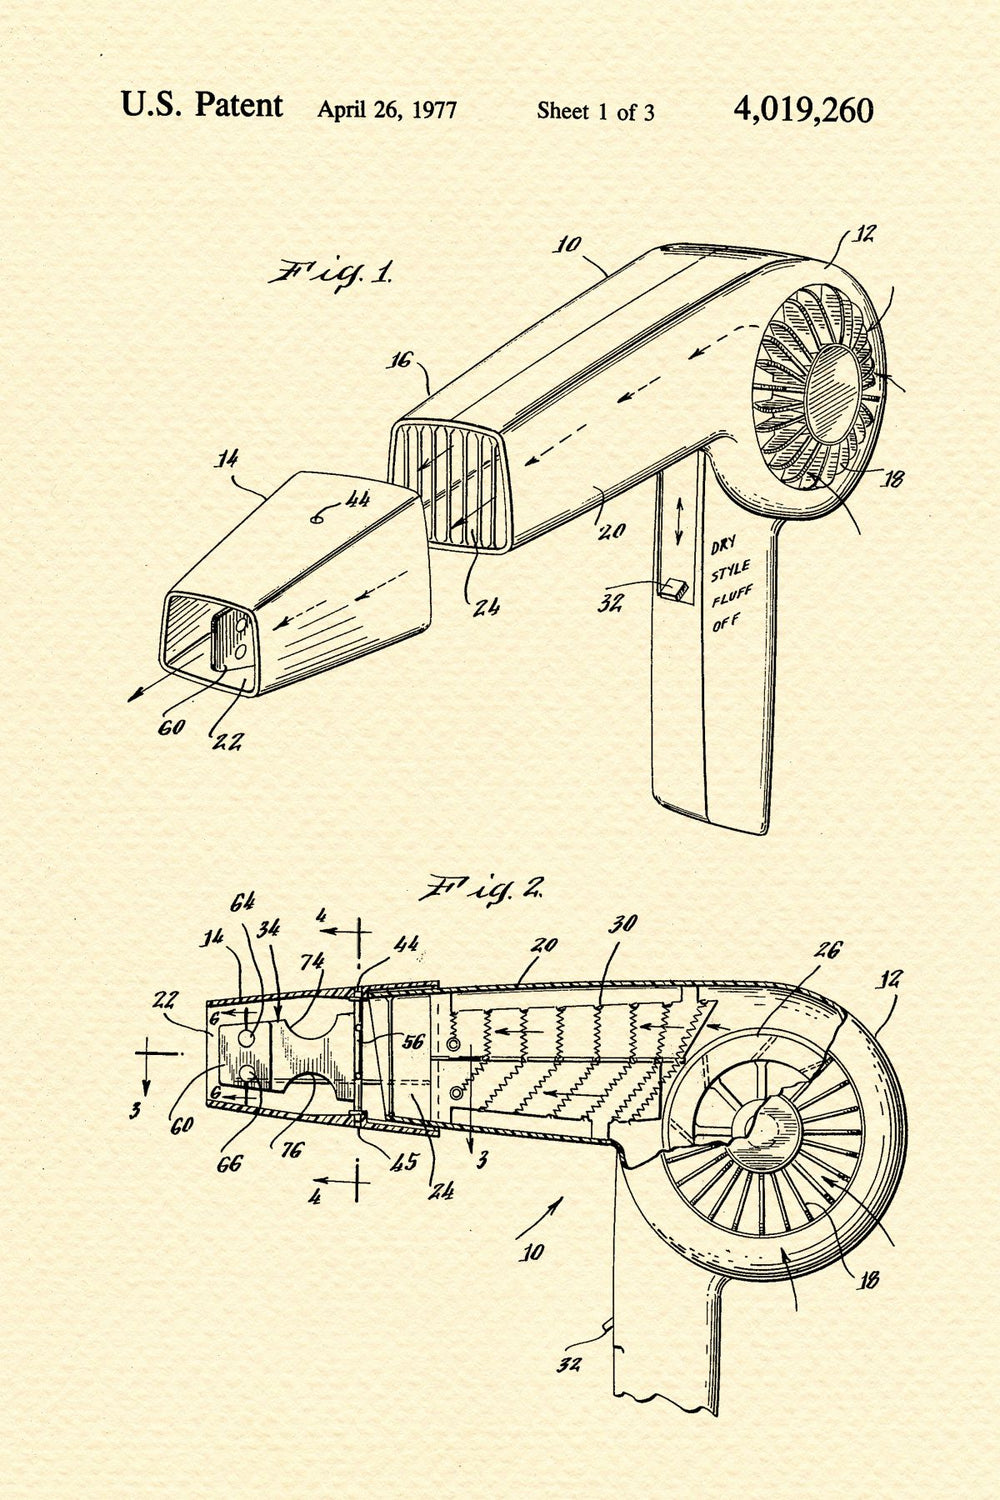 Hair Drying Device Vintage Patent